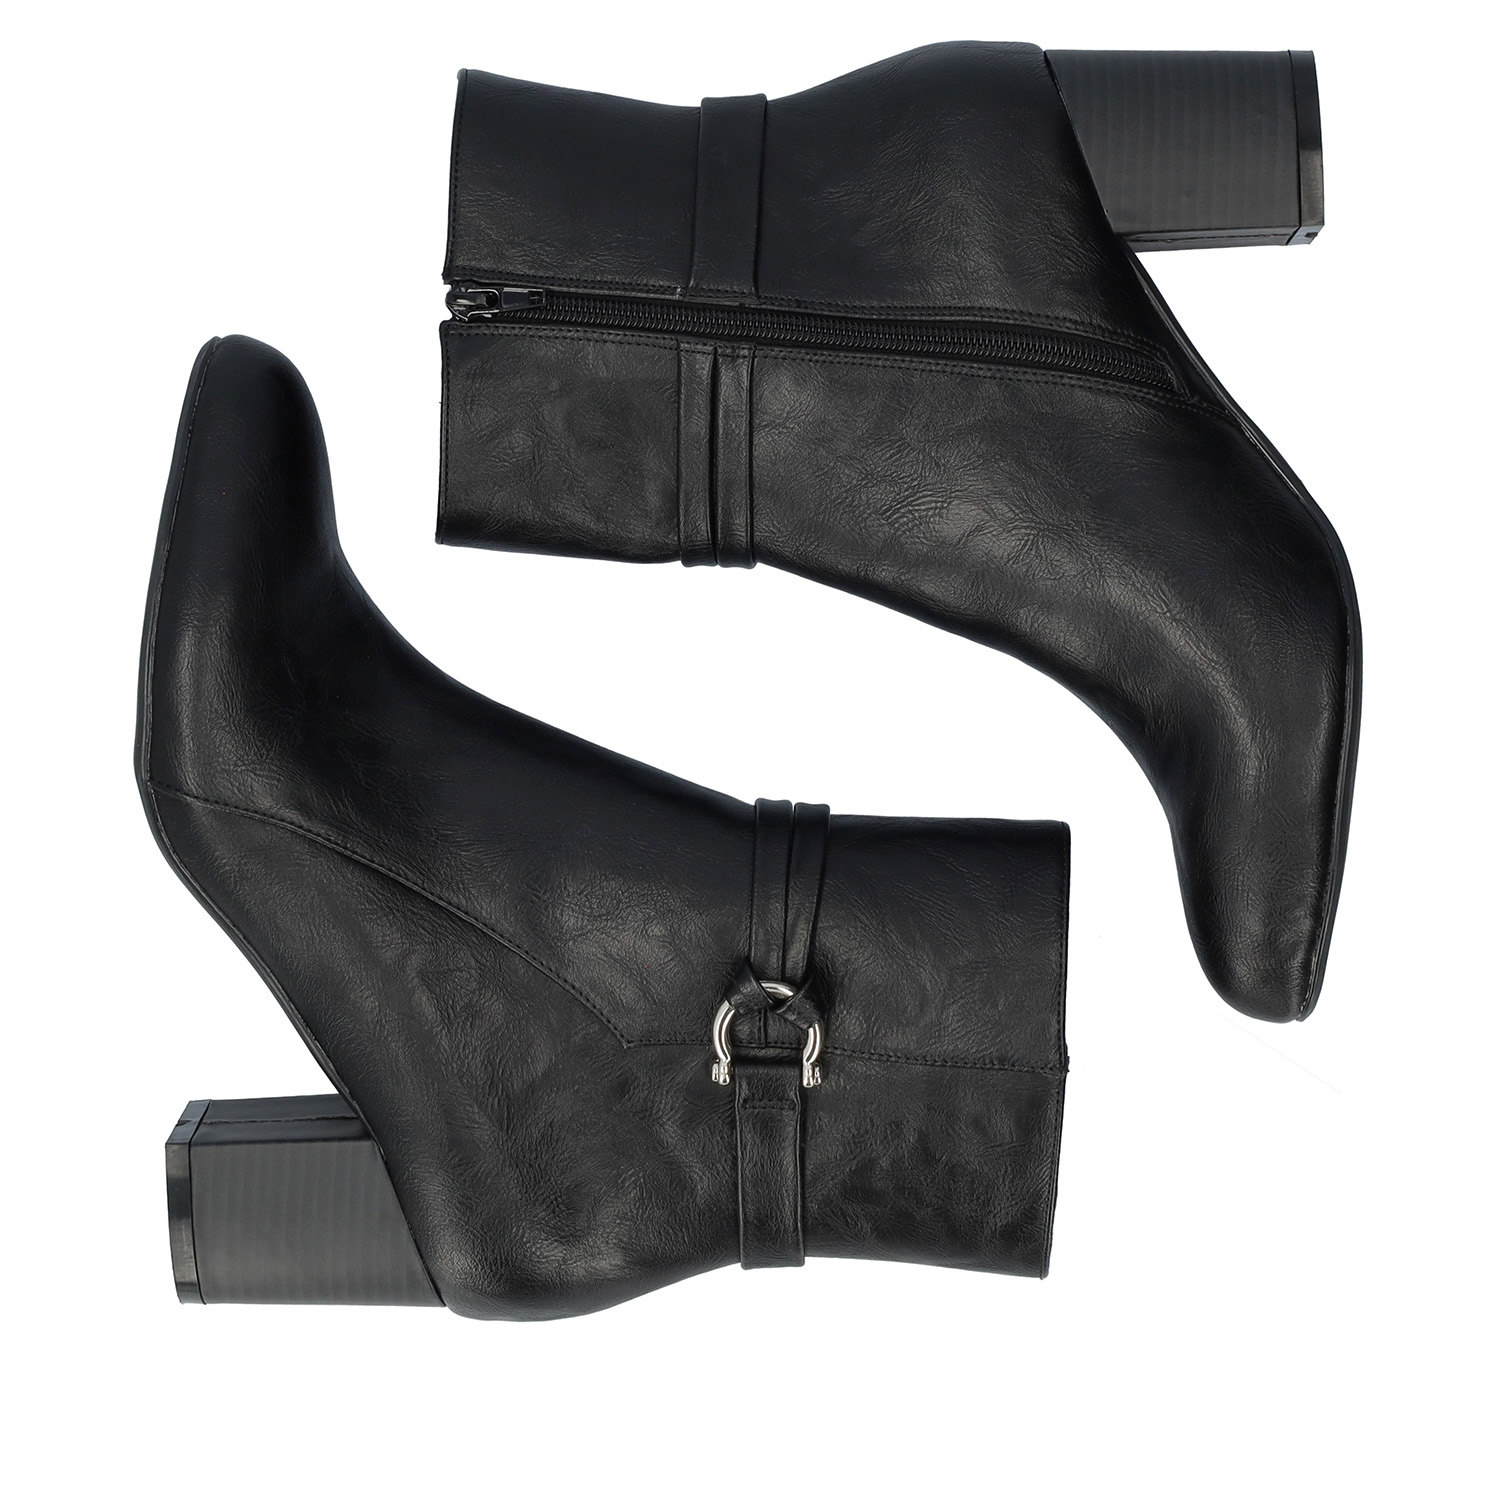 Black faux leather booties. 